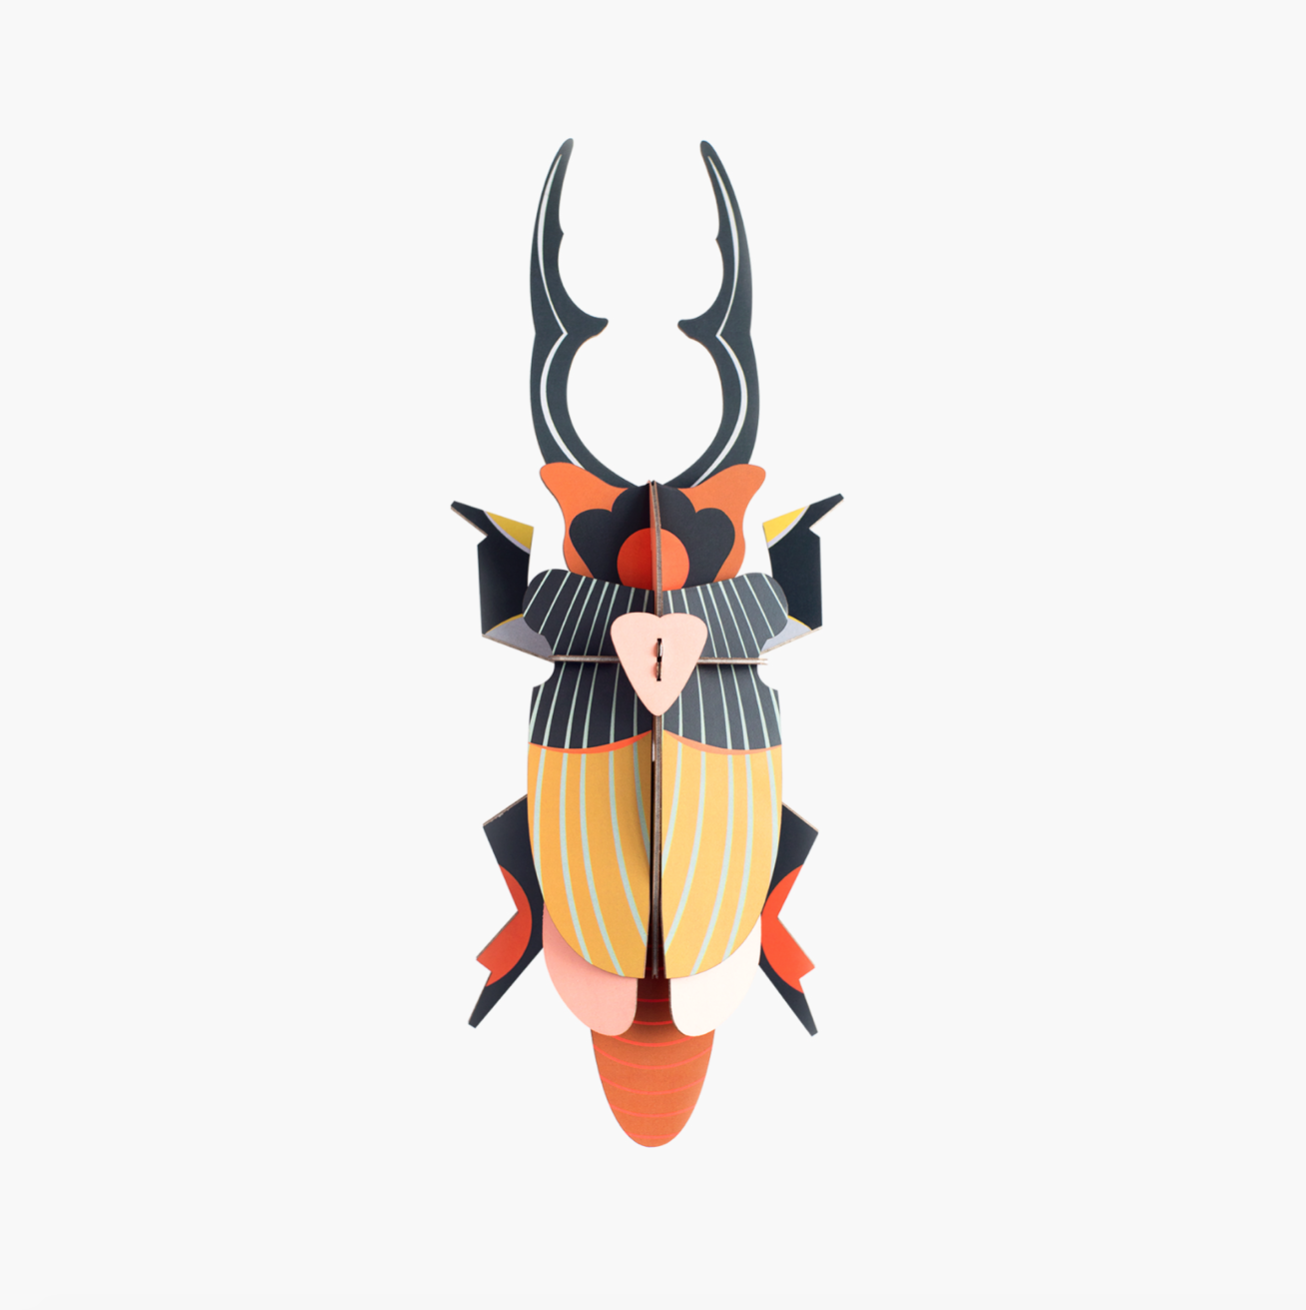 Small insects, Giant stag beetle